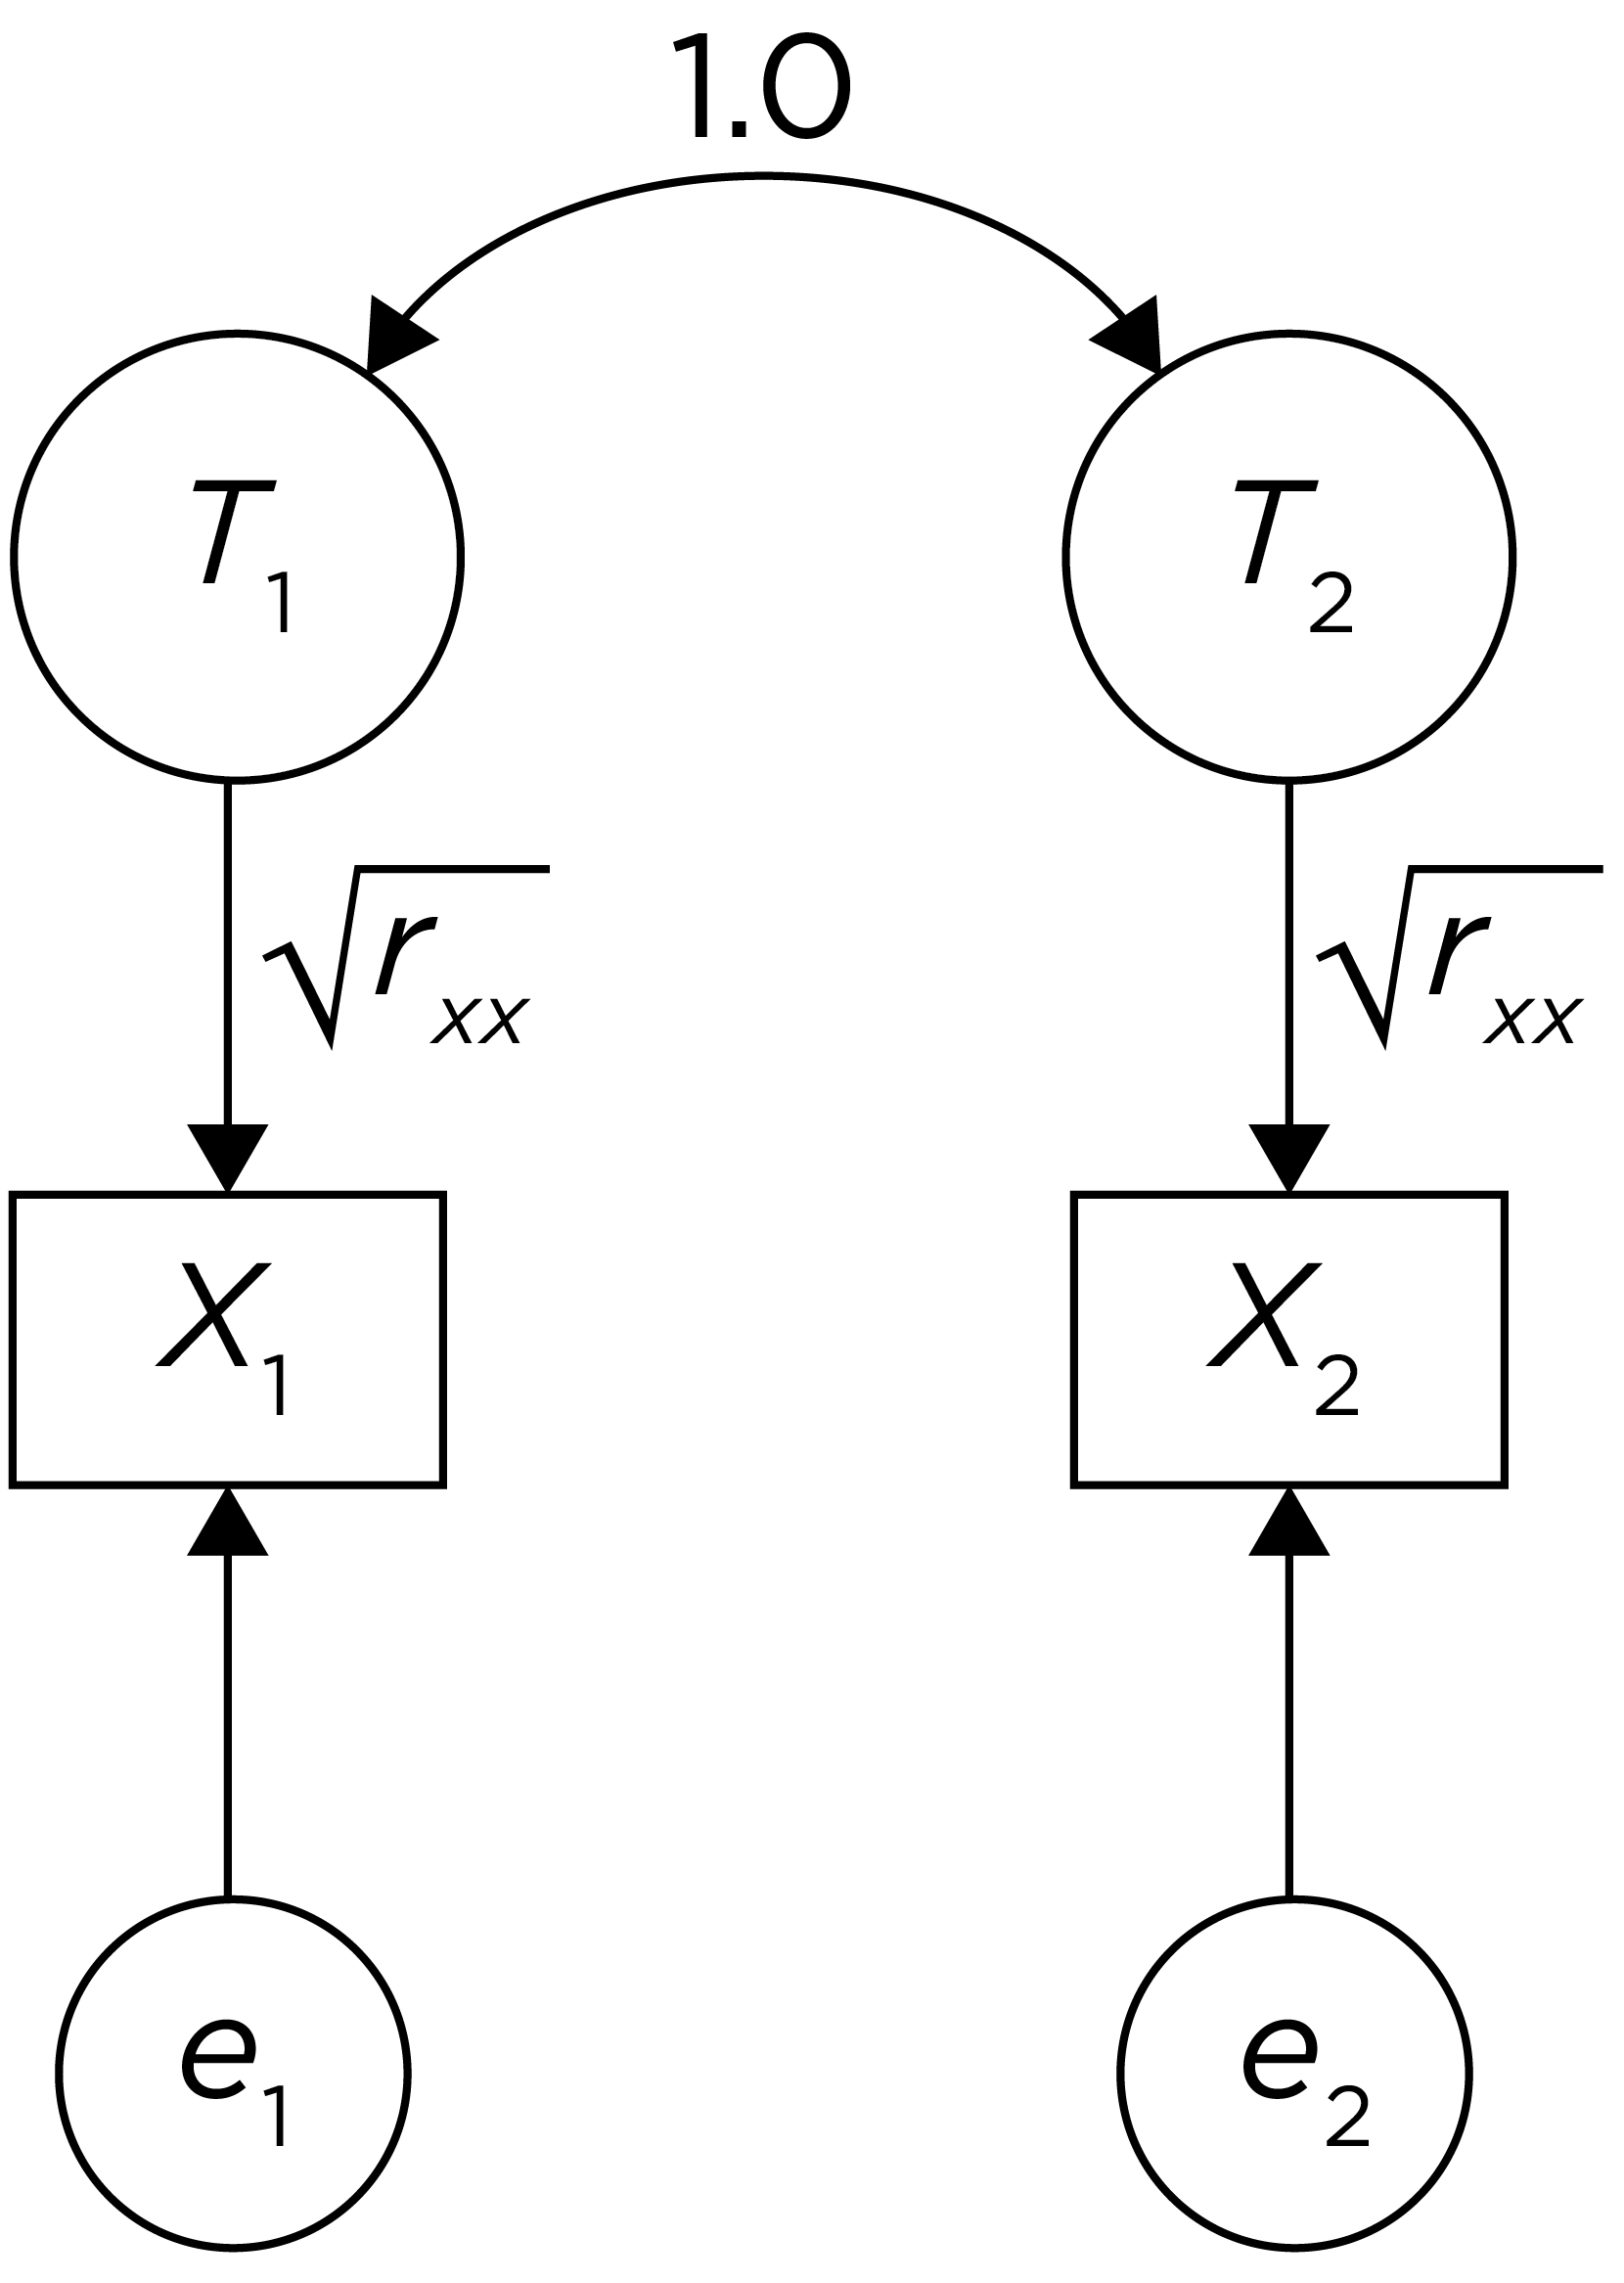 Reliability of a Measure of a Stable Construct Across Two Time Points, as Depicted in a Path Diagram.